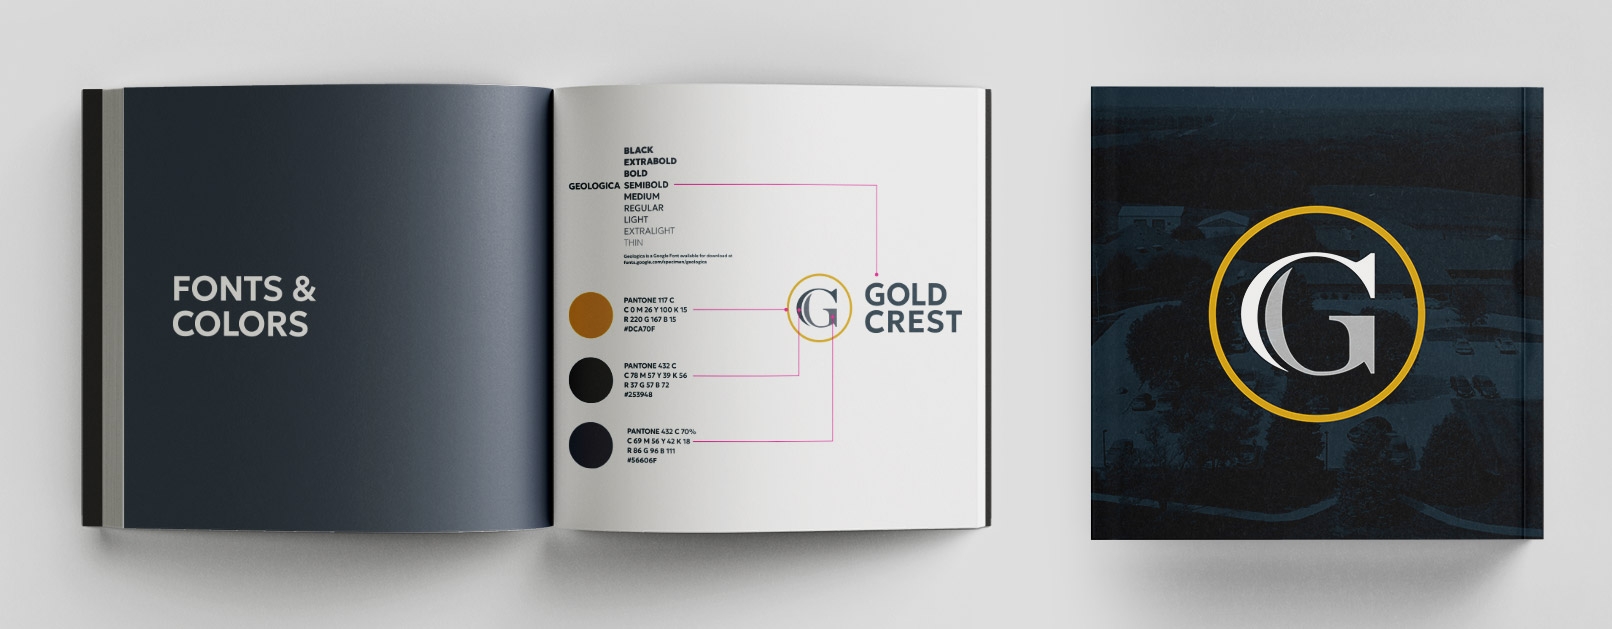 gold crest brand guide